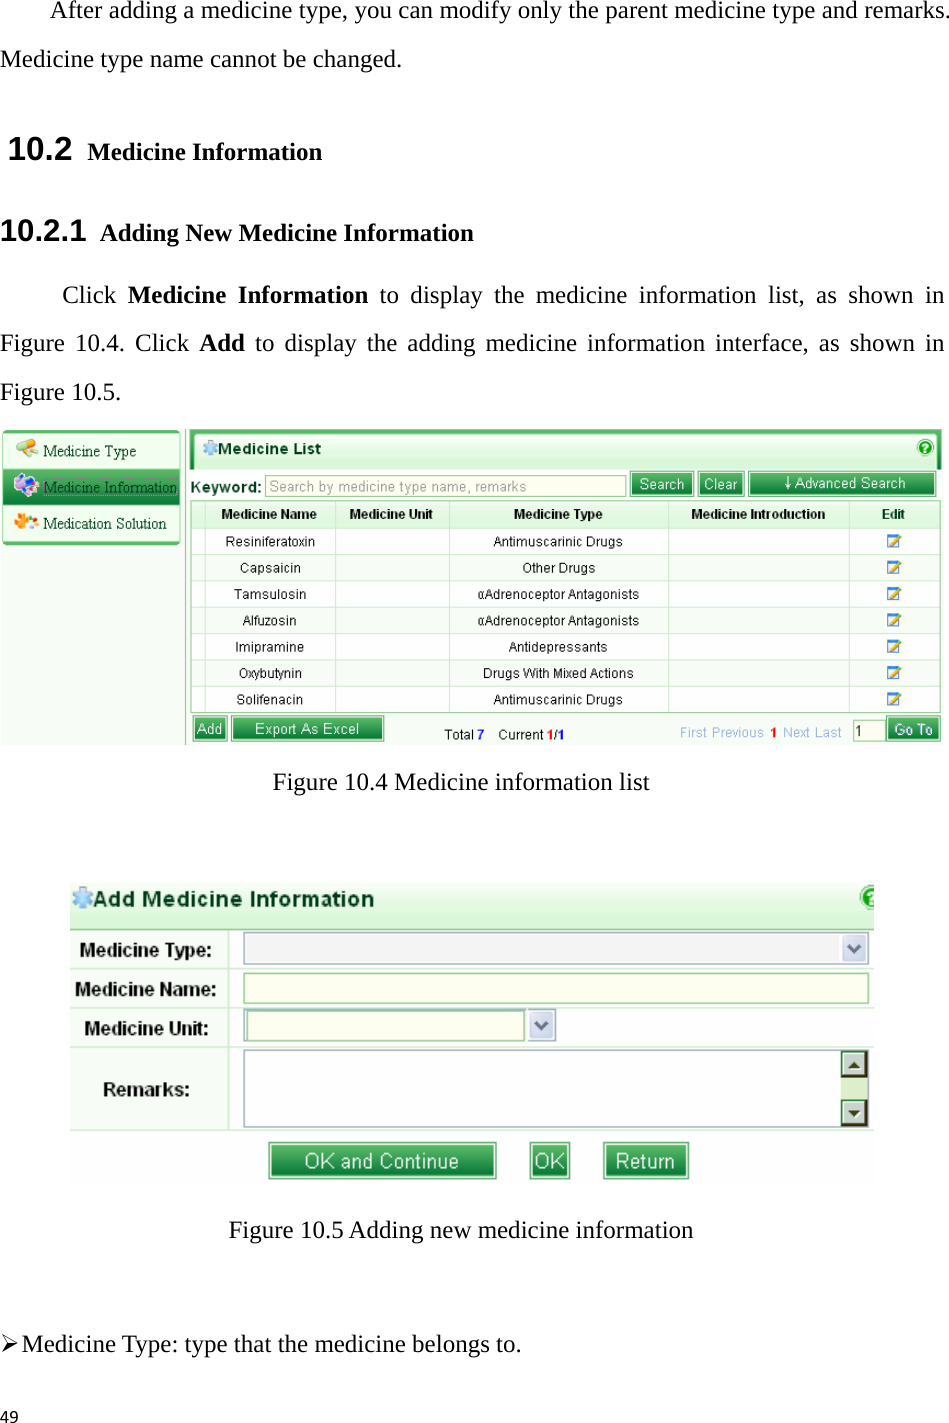 49 After adding a medicine type, you can modify only the parent medicine type and remarks. Medicine type name cannot be changed. 10.2  Medicine Information 10.2.1   Adding New Medicine Information Click  Medicine Information to display the medicine information list, as shown in Figure 10.4. Click Add to display the adding medicine information interface, as shown in Figure 10.5.    Figure 10.4 Medicine information list      Figure 10.5 Adding new medicine information  ¾ Medicine Type: type that the medicine belongs to. 